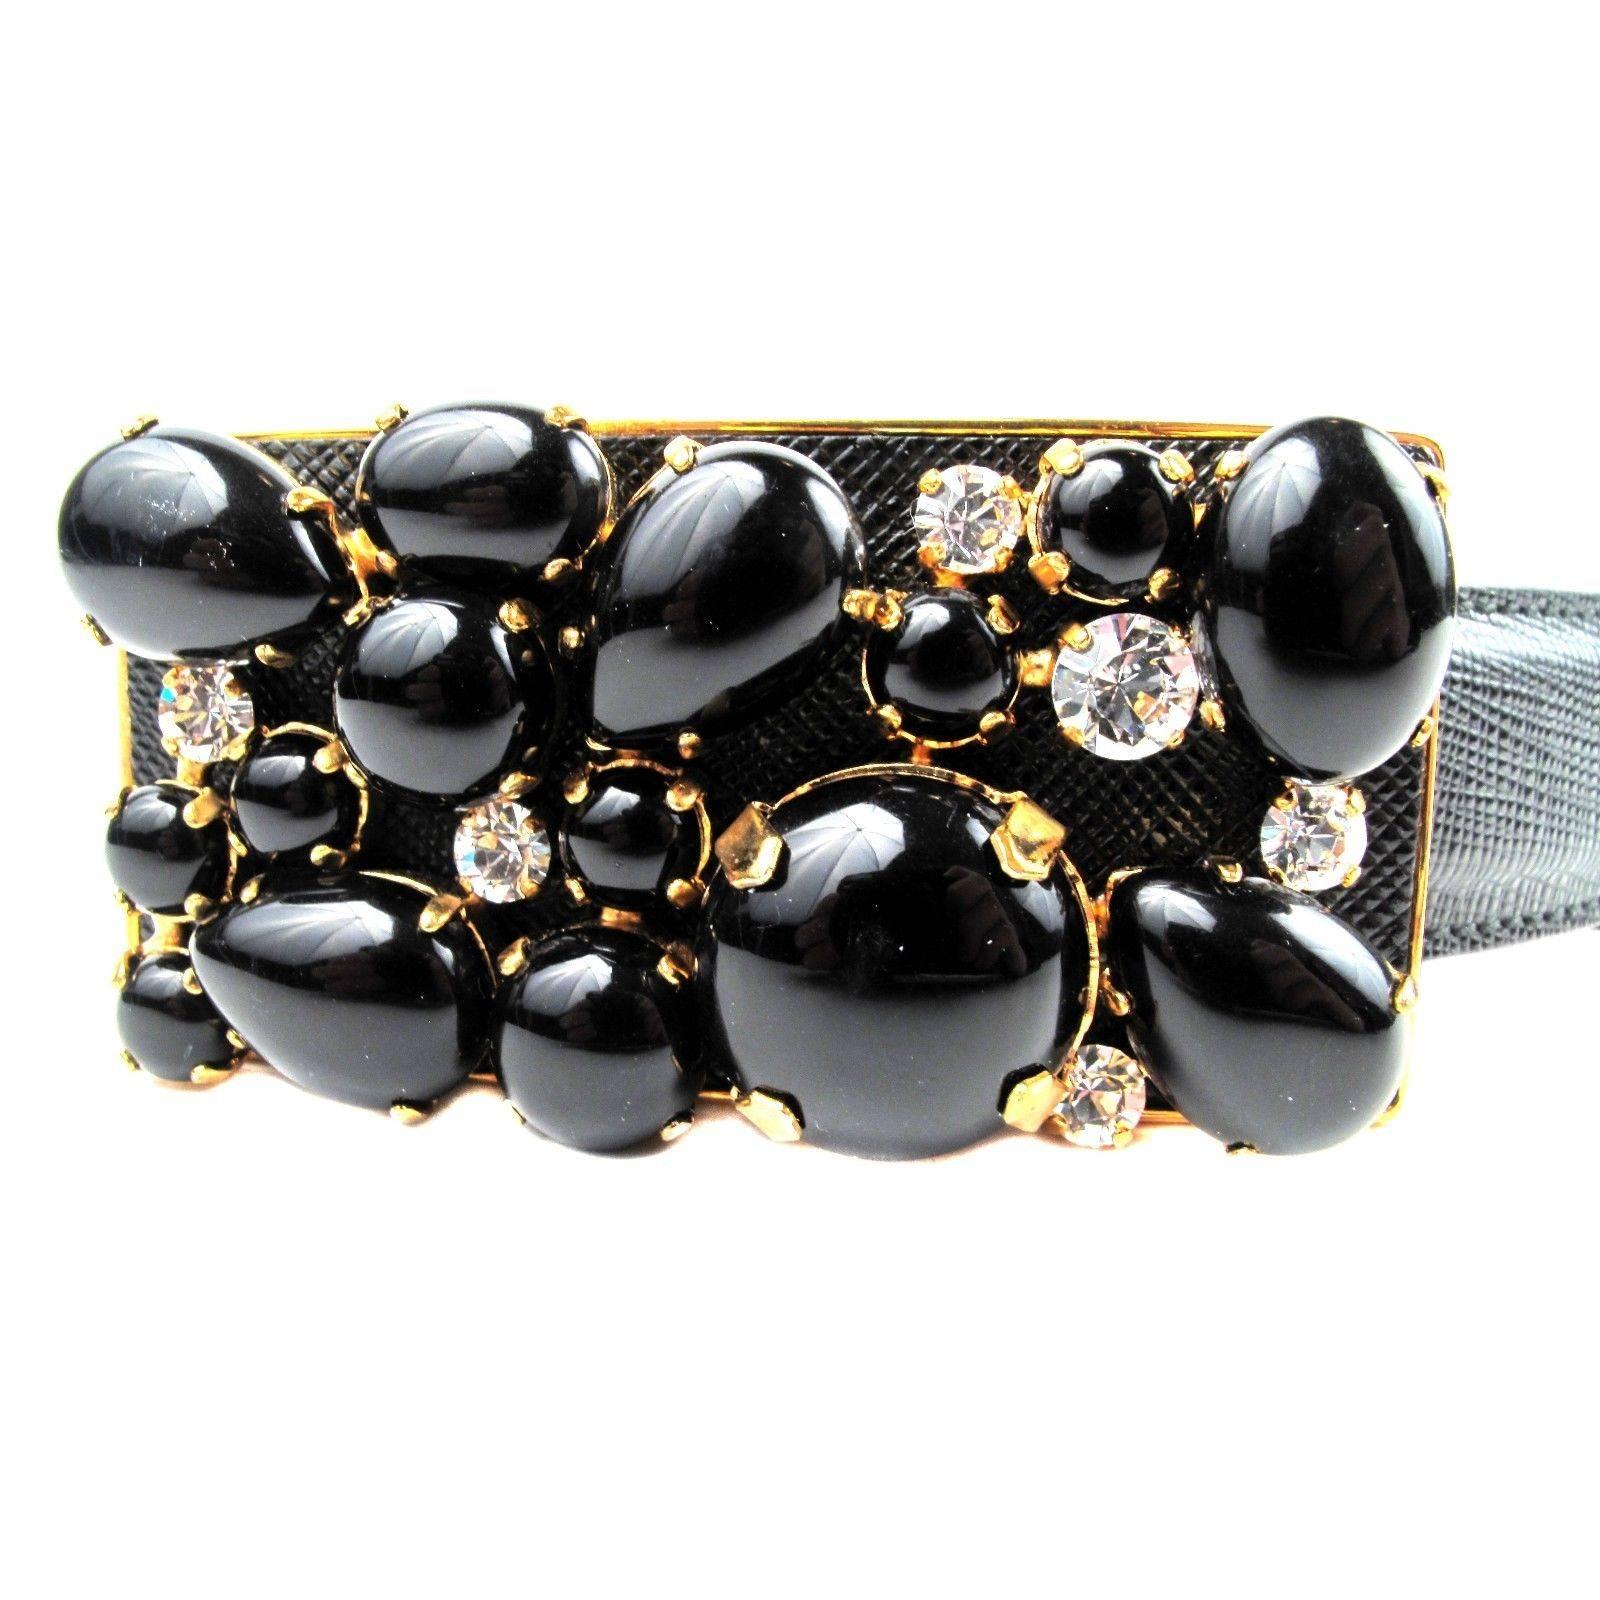 Color: Black

Material: Leather 

Size: Small 

------------------------------------------------------------

Details:

- embellishments at buckle

- gold tone hardware

- peg-in-hole closure

- item # AA1048

Condition: Great